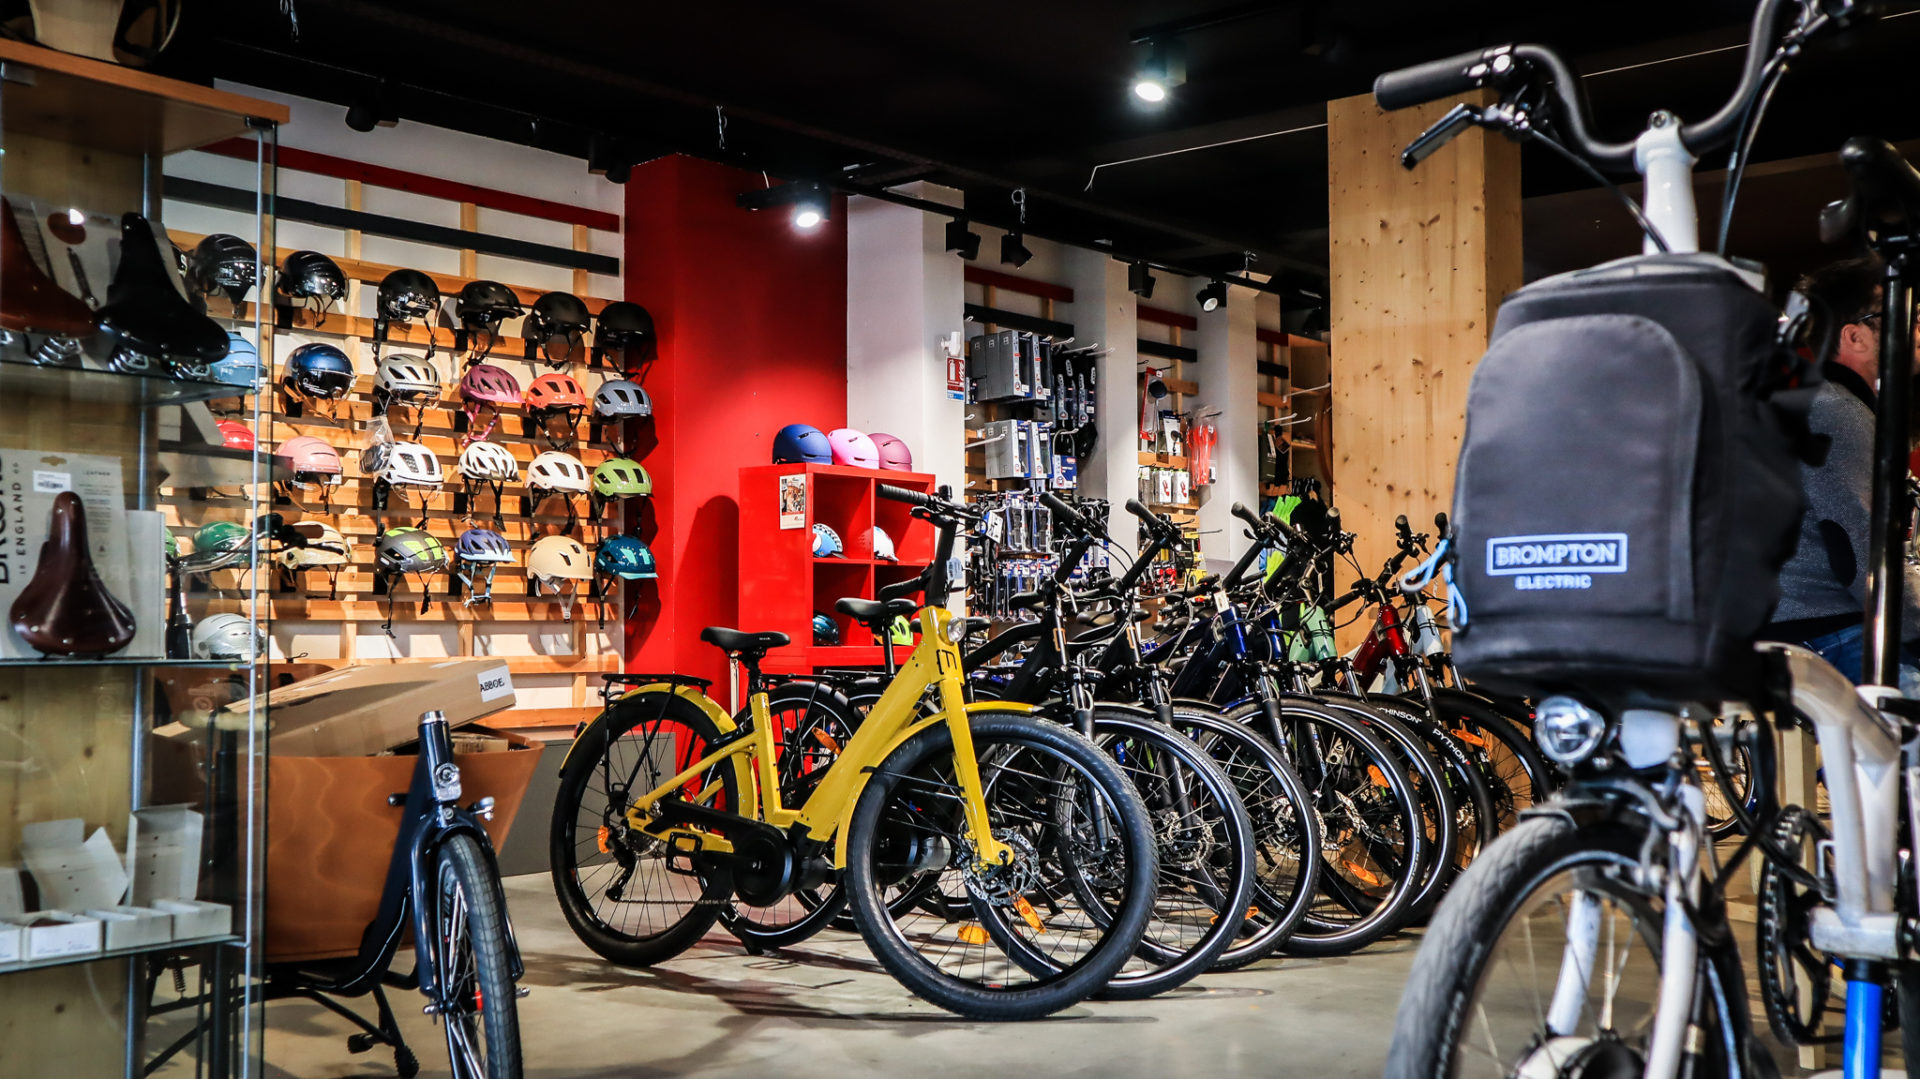 Weelz Visite Rennes Magasin Velo Cyclable 2021 8729